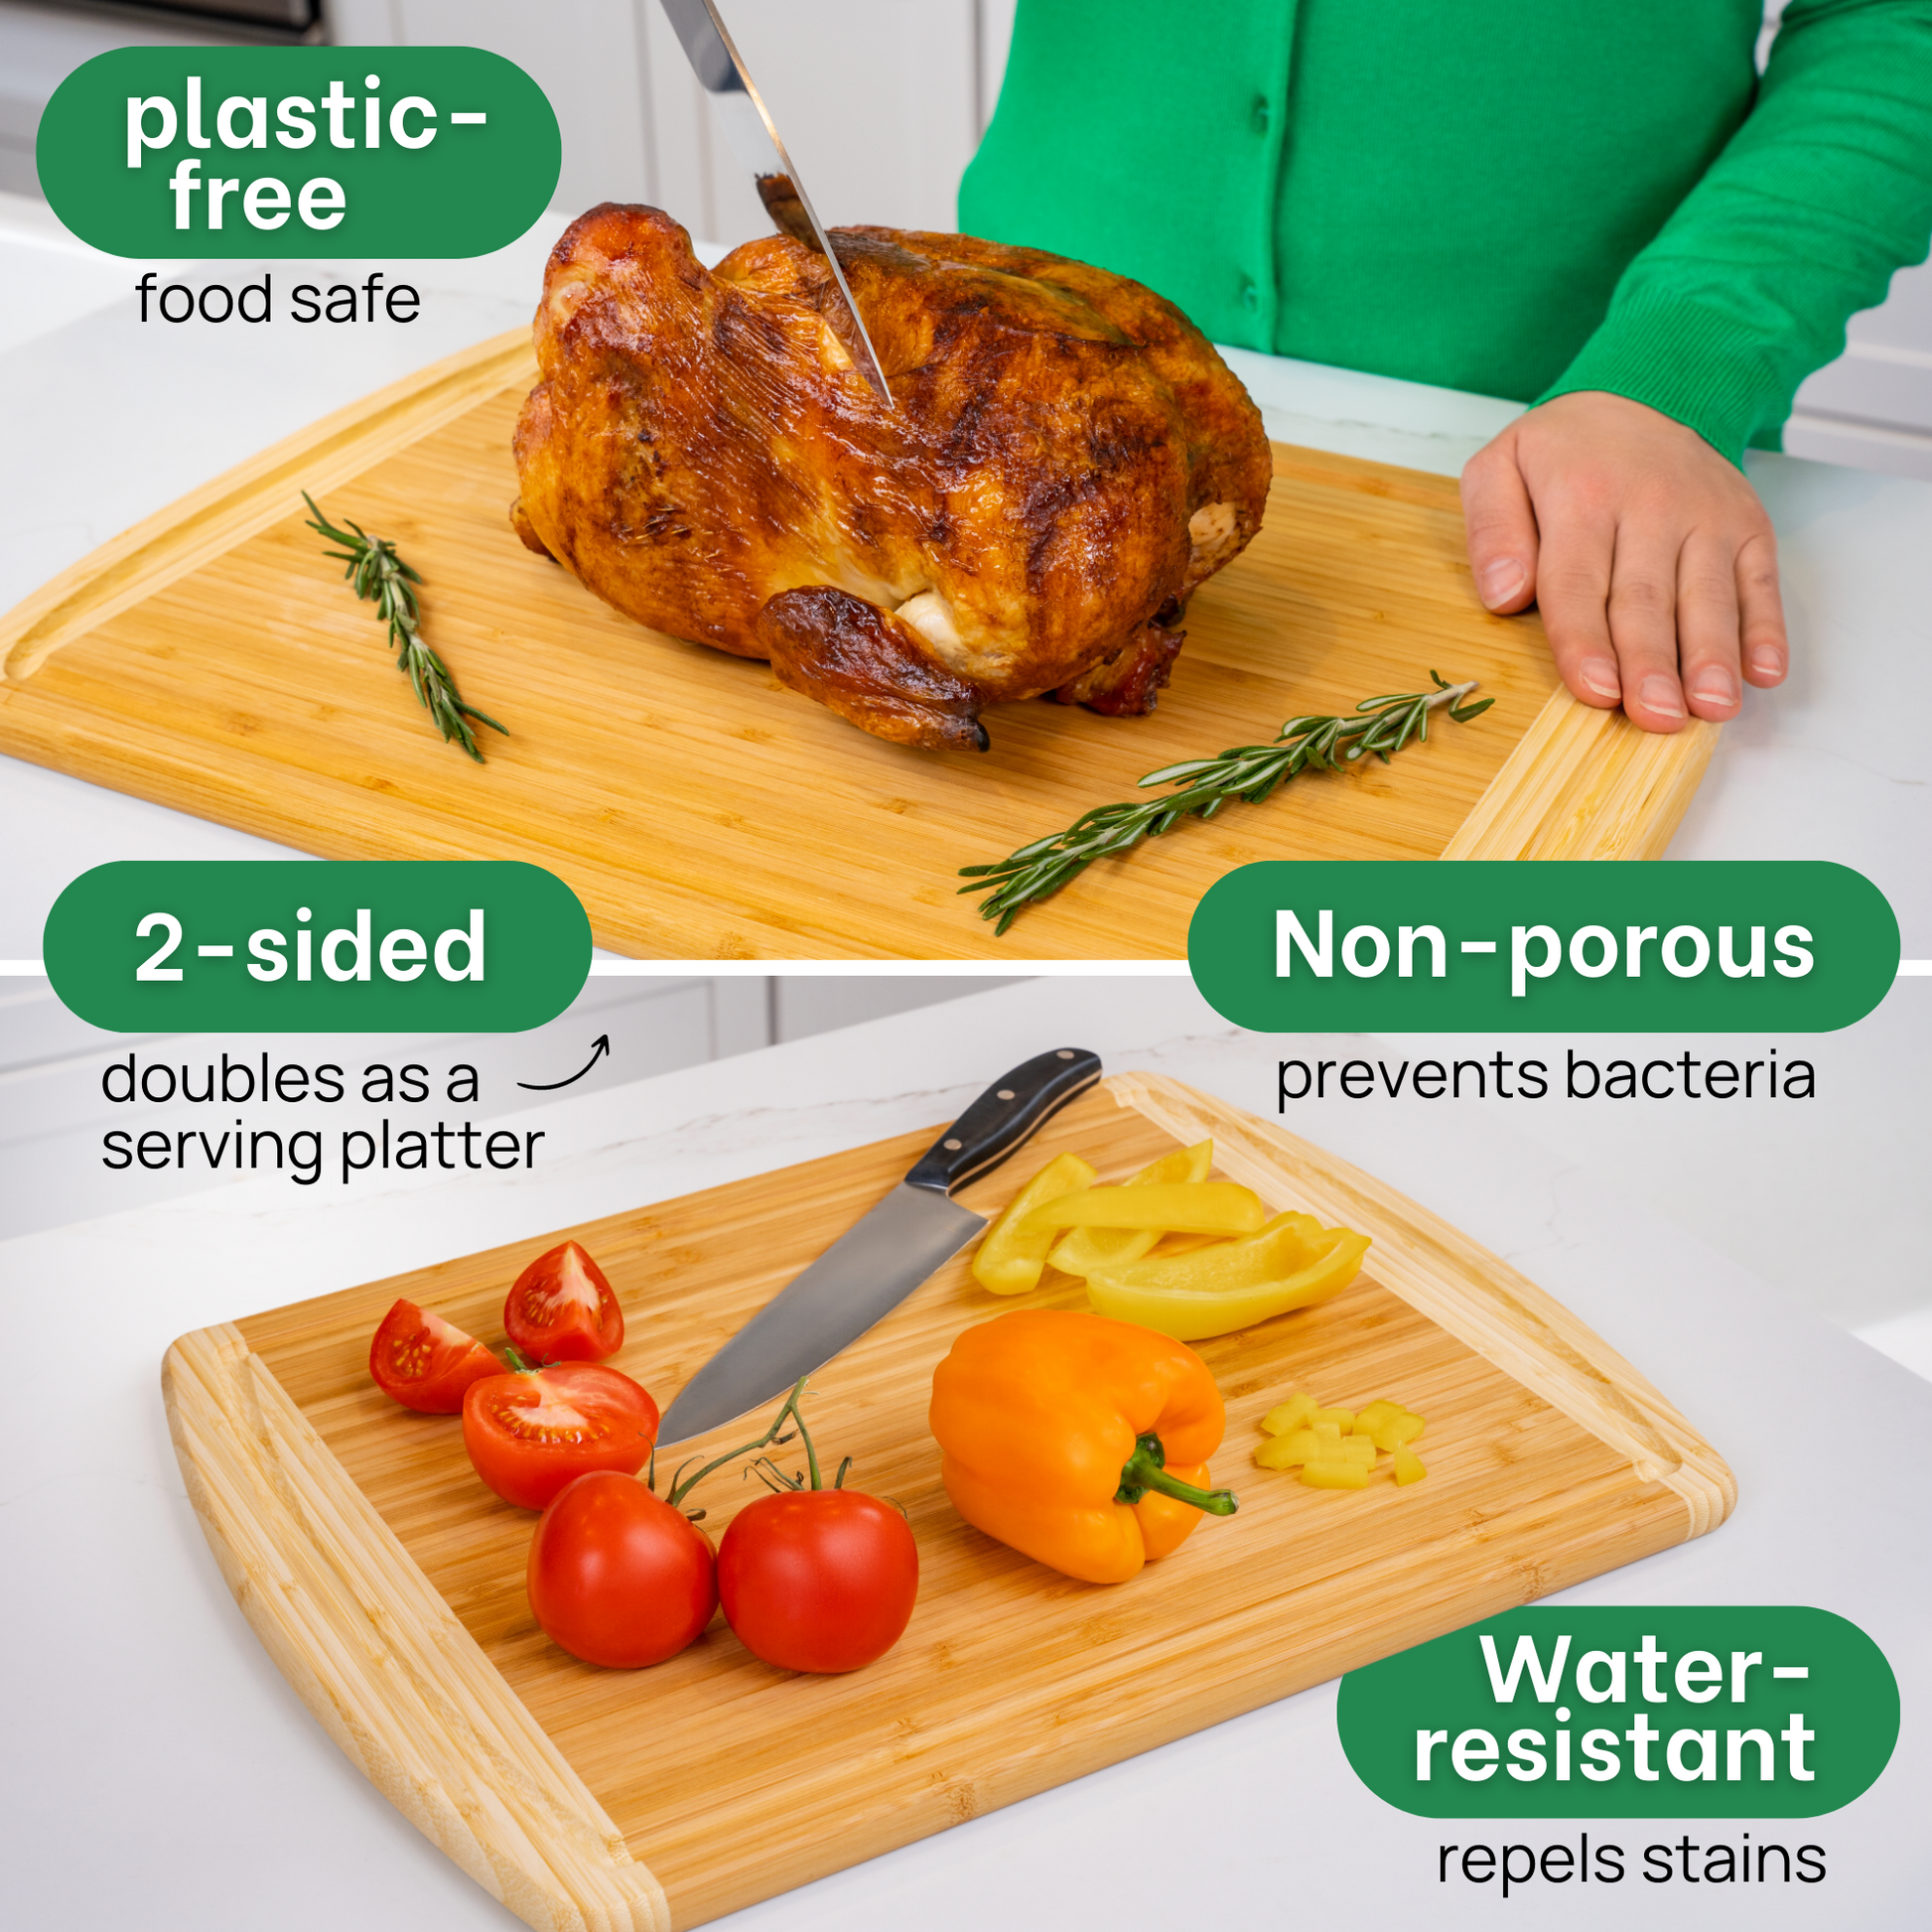 Extra Large Organic Bamboo Cutting Boards for Kitchen, XL Turkey Carvi –  Greener Chef ®